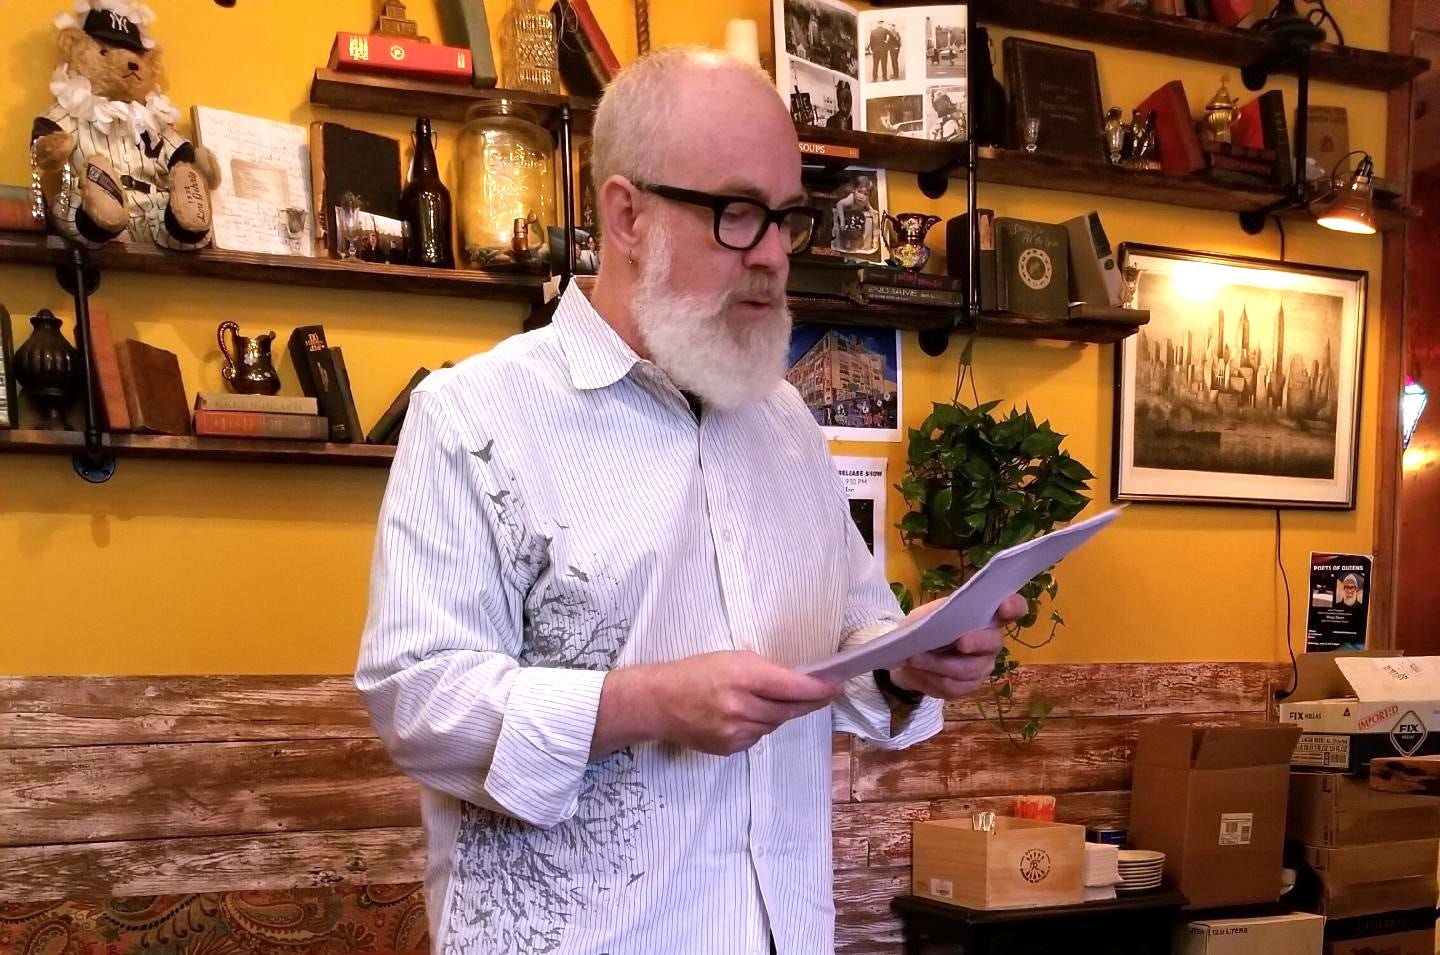 A bearded man in glasses and a striped long-sleeved shirt with a print of birds in a tree reads from a paper manuscript in a warmly lit rustic space before a yellow-painted wall and shelves crowded with books and knickknacks.